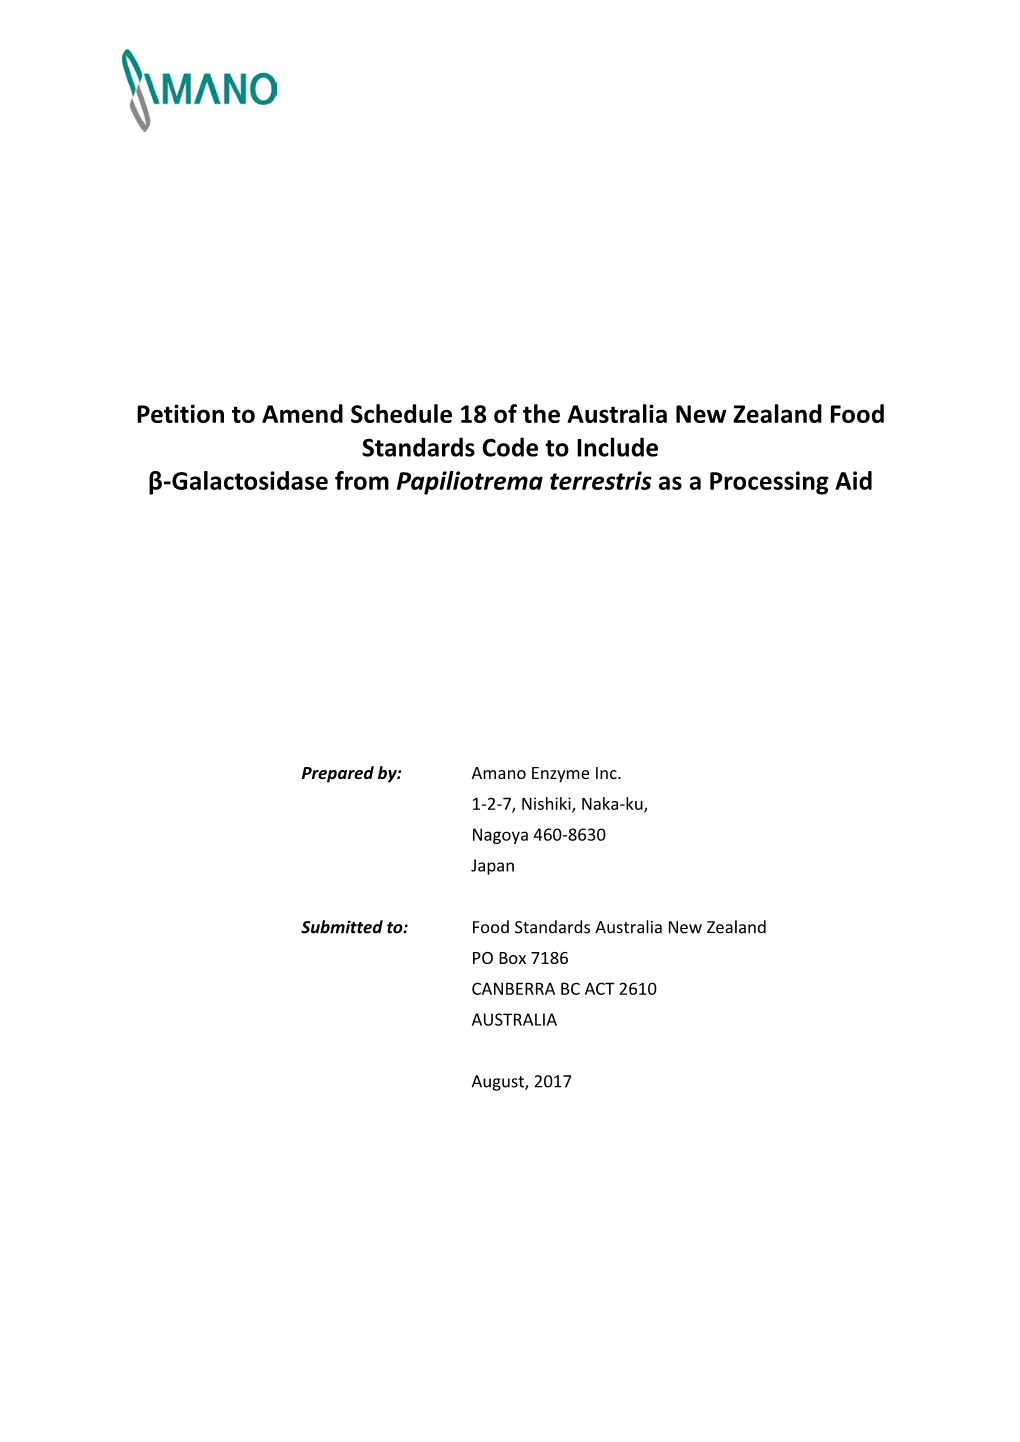 Petition to Amend Schedule 18 of the Australia New Zealand Food Standards Code to Include Β-Galactosidase from Papiliotrema Terrestris As a Processing Aid